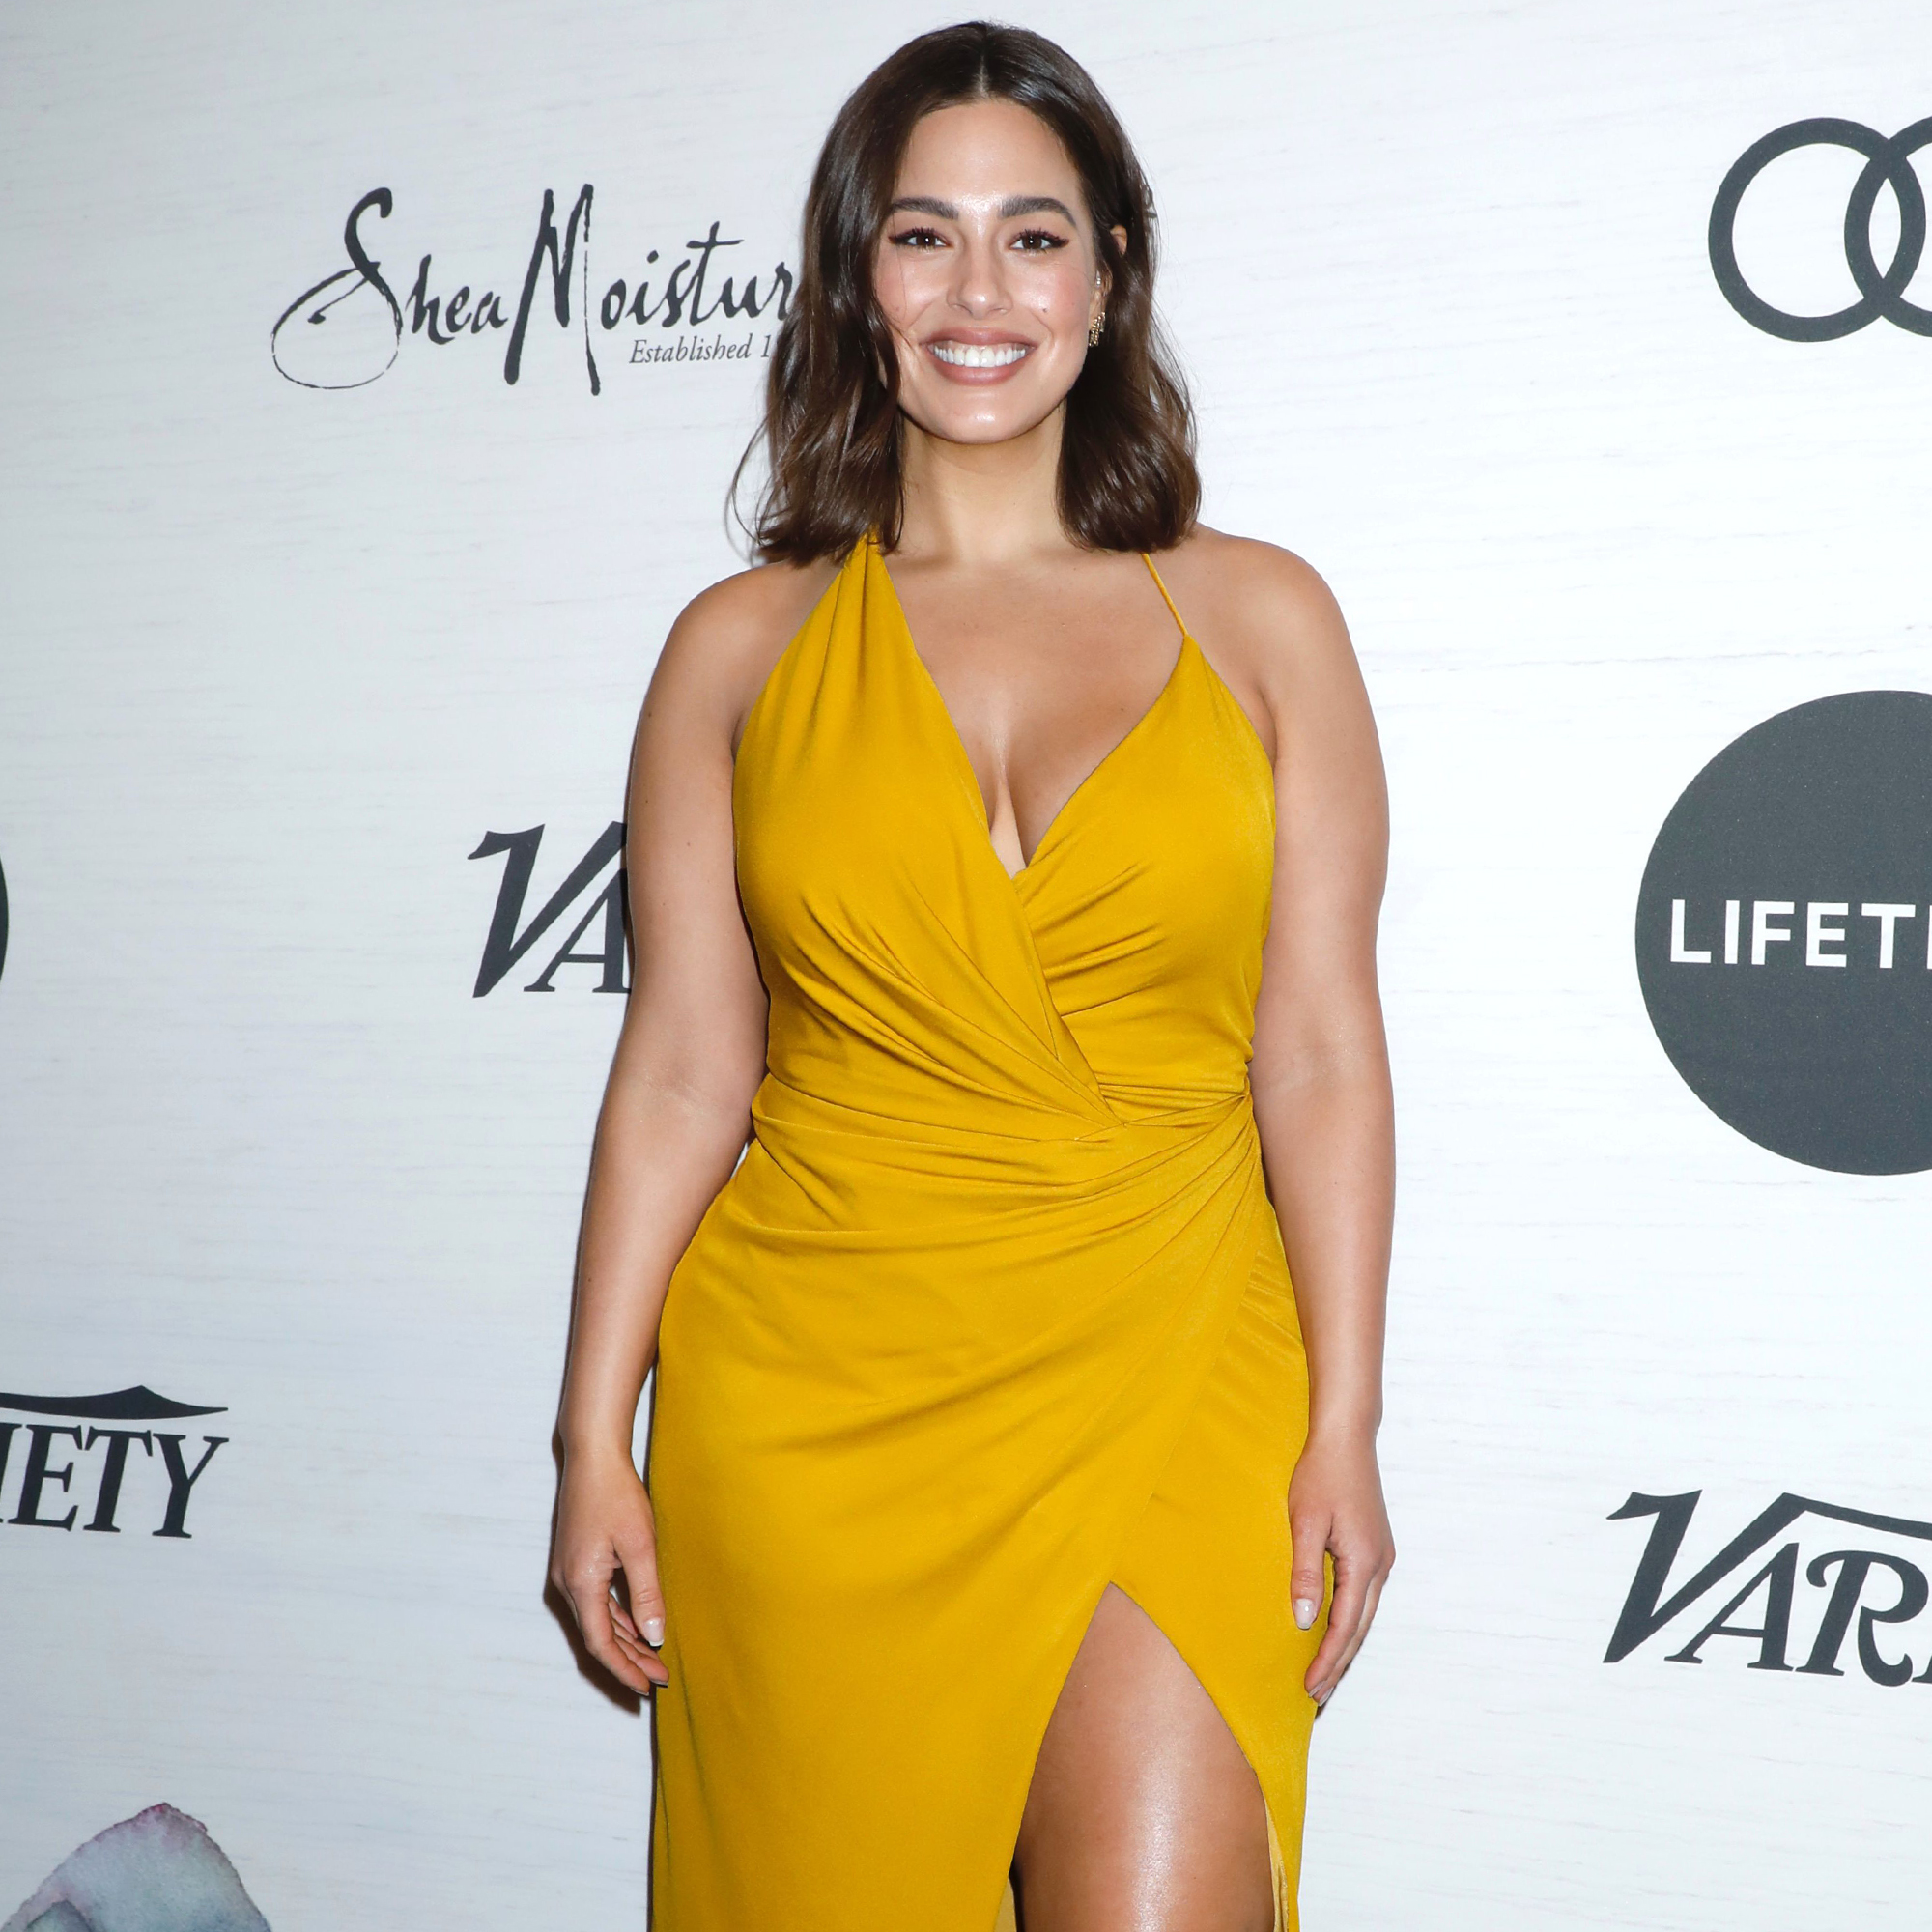 Baby Girl Pregnant - Pregnant Ashley Graham Praised for Nude Photo With Stretch Marks